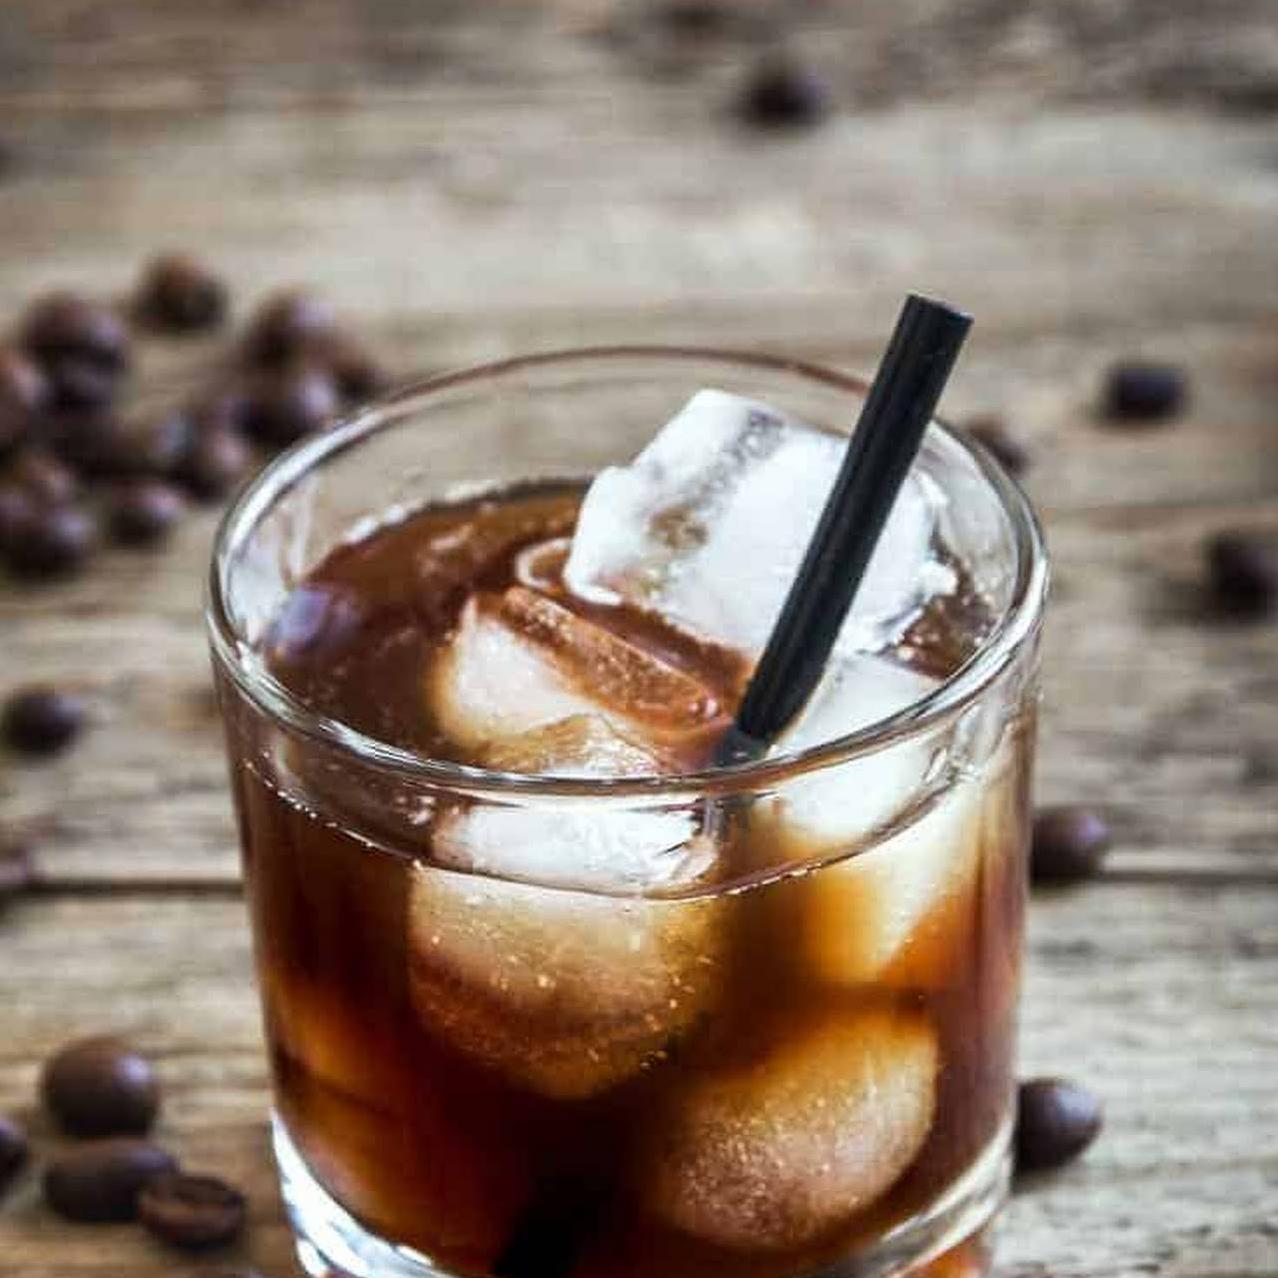  Wake up and smell the coffee - and the Kahlua, of course.